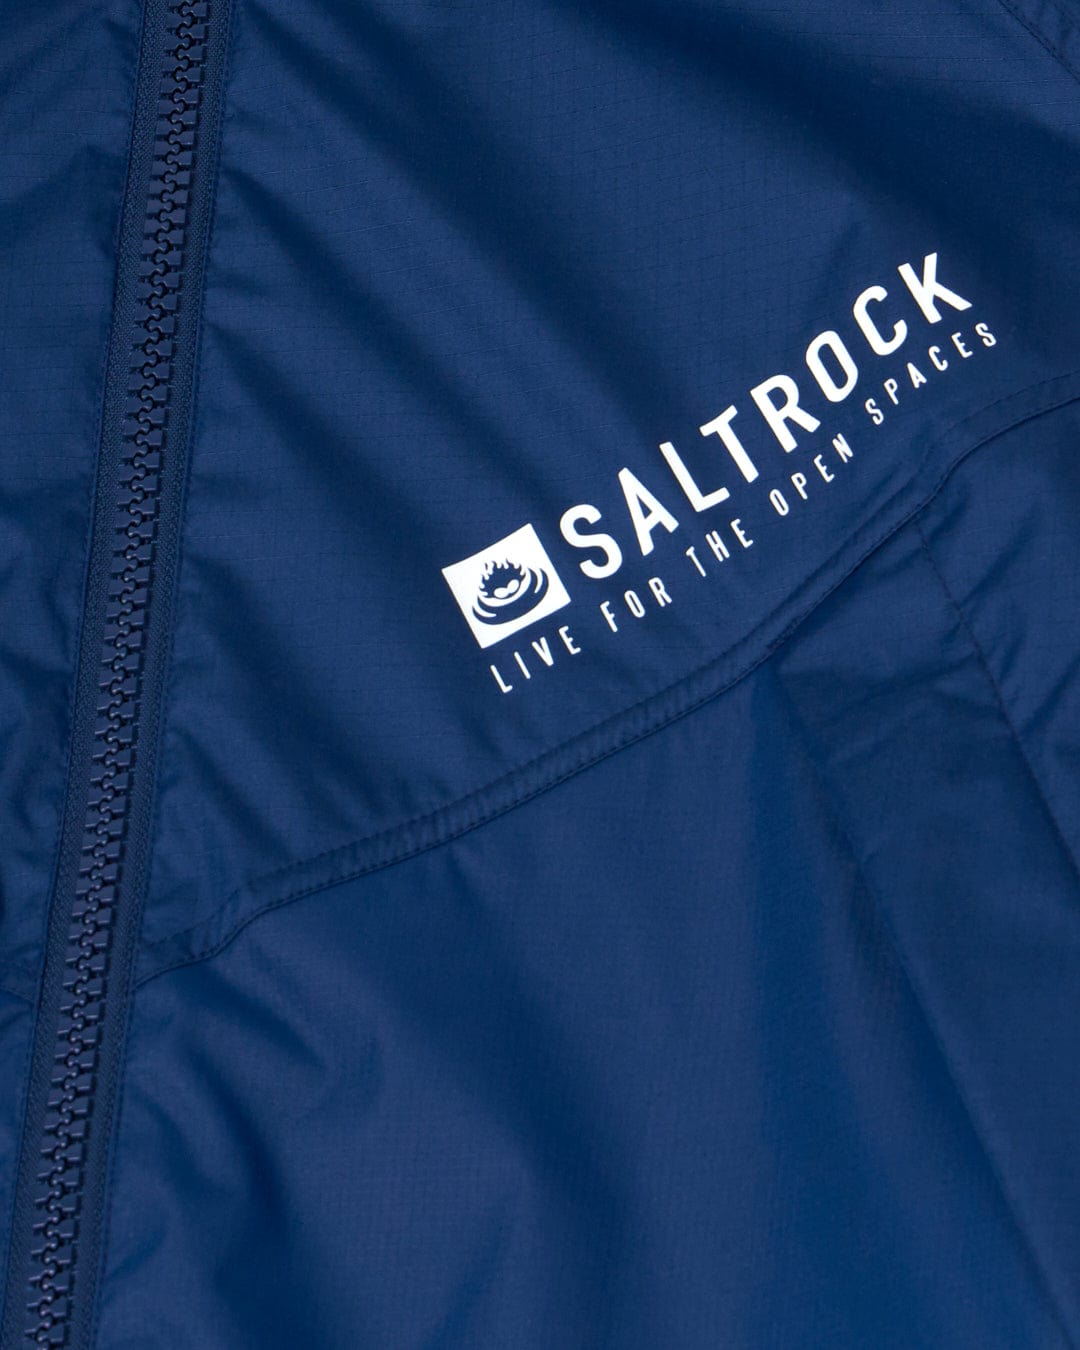 Close-up of a Saltrock Recycled Four Seasons Changing Robe - Blue, showing the brand logo and the slogan "live for the open spaces" on the chest.